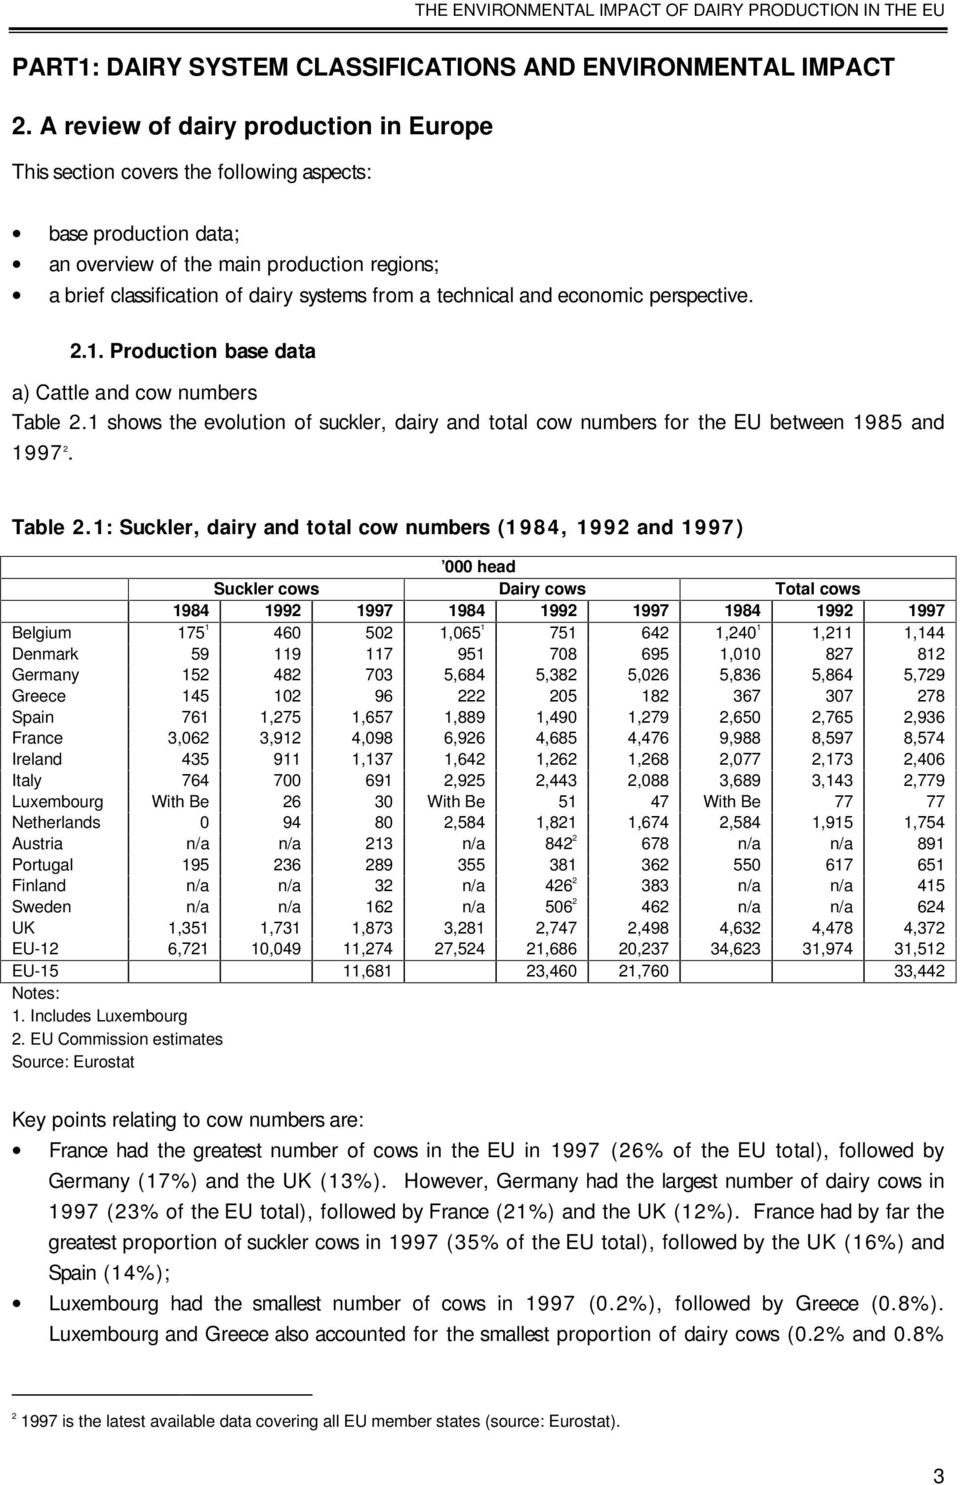 technical and economic perspective. 2.1.Production base data a) Cattle and cow numbers Table 2.1 shows the evolution of suckler, dairy and total cow numbers for the EU between 1985 and 1997 2.